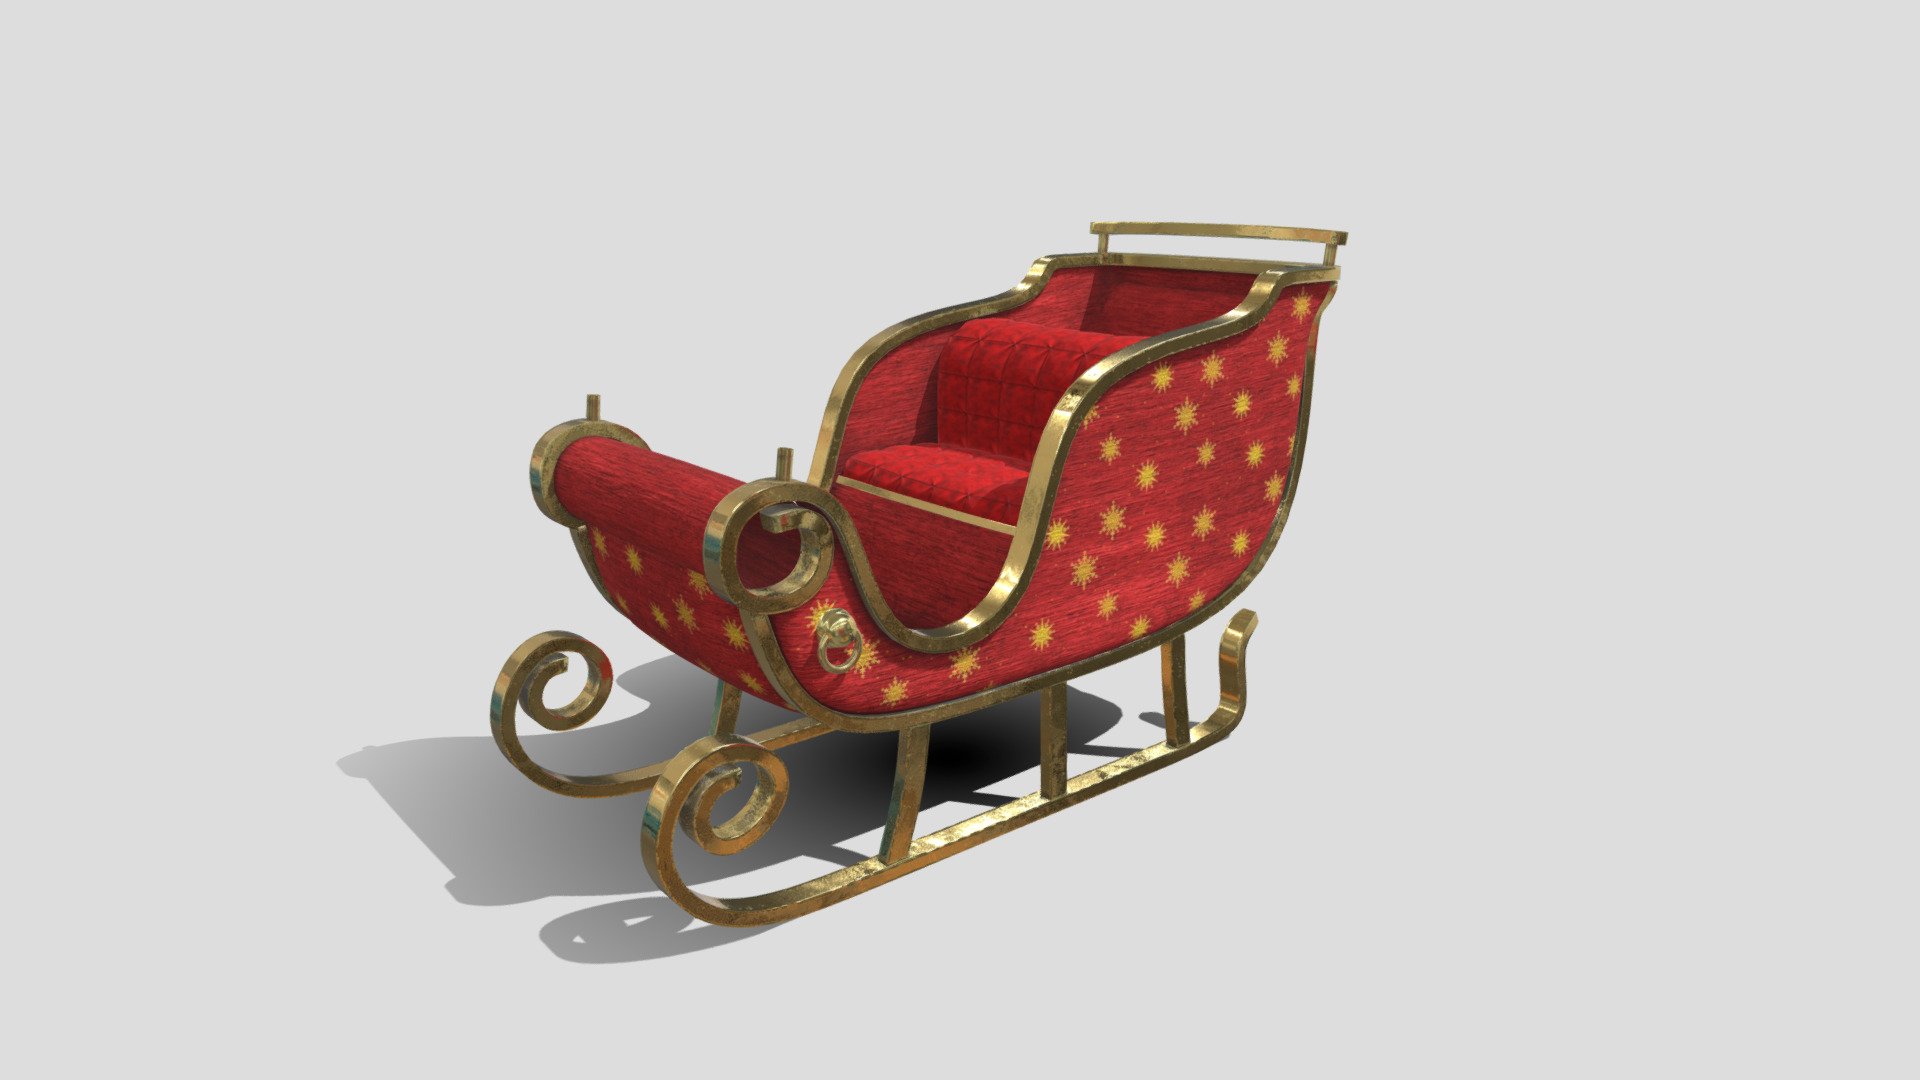 Low poly 3d model of red sled with golden ornaments - Holiday decorated Sled - Buy Royalty Free 3D model by assetfactory 3d model